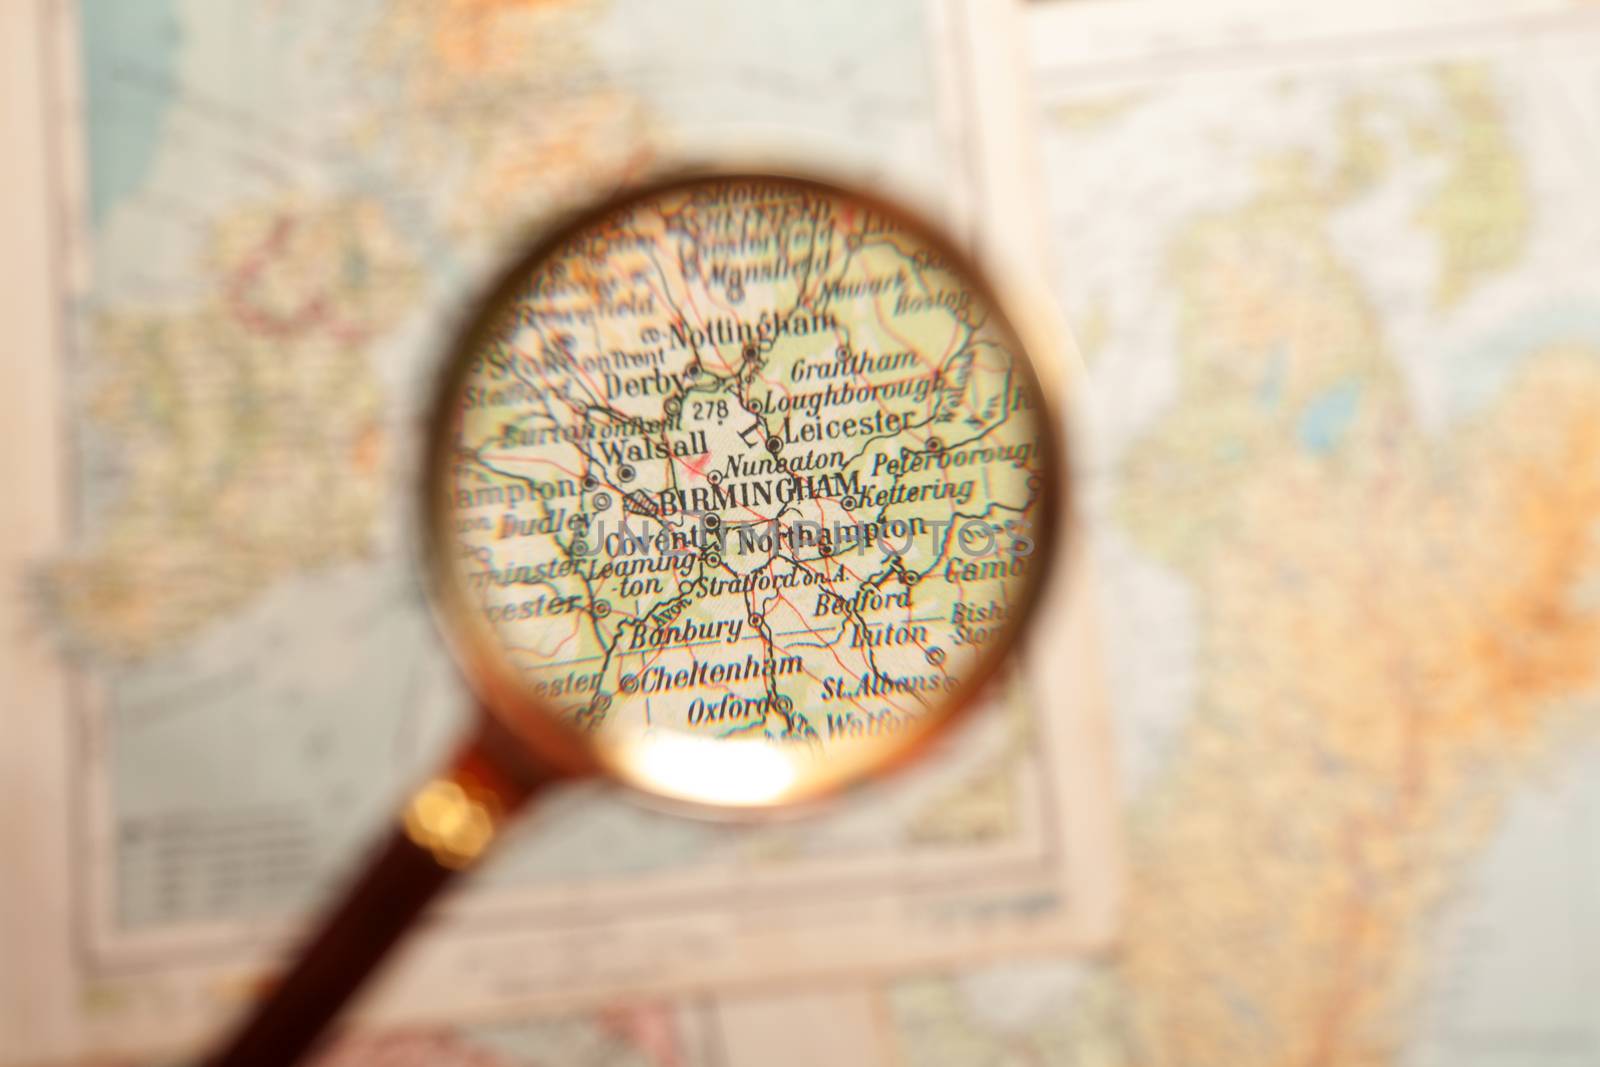 Magnifying glass and map by Portokalis